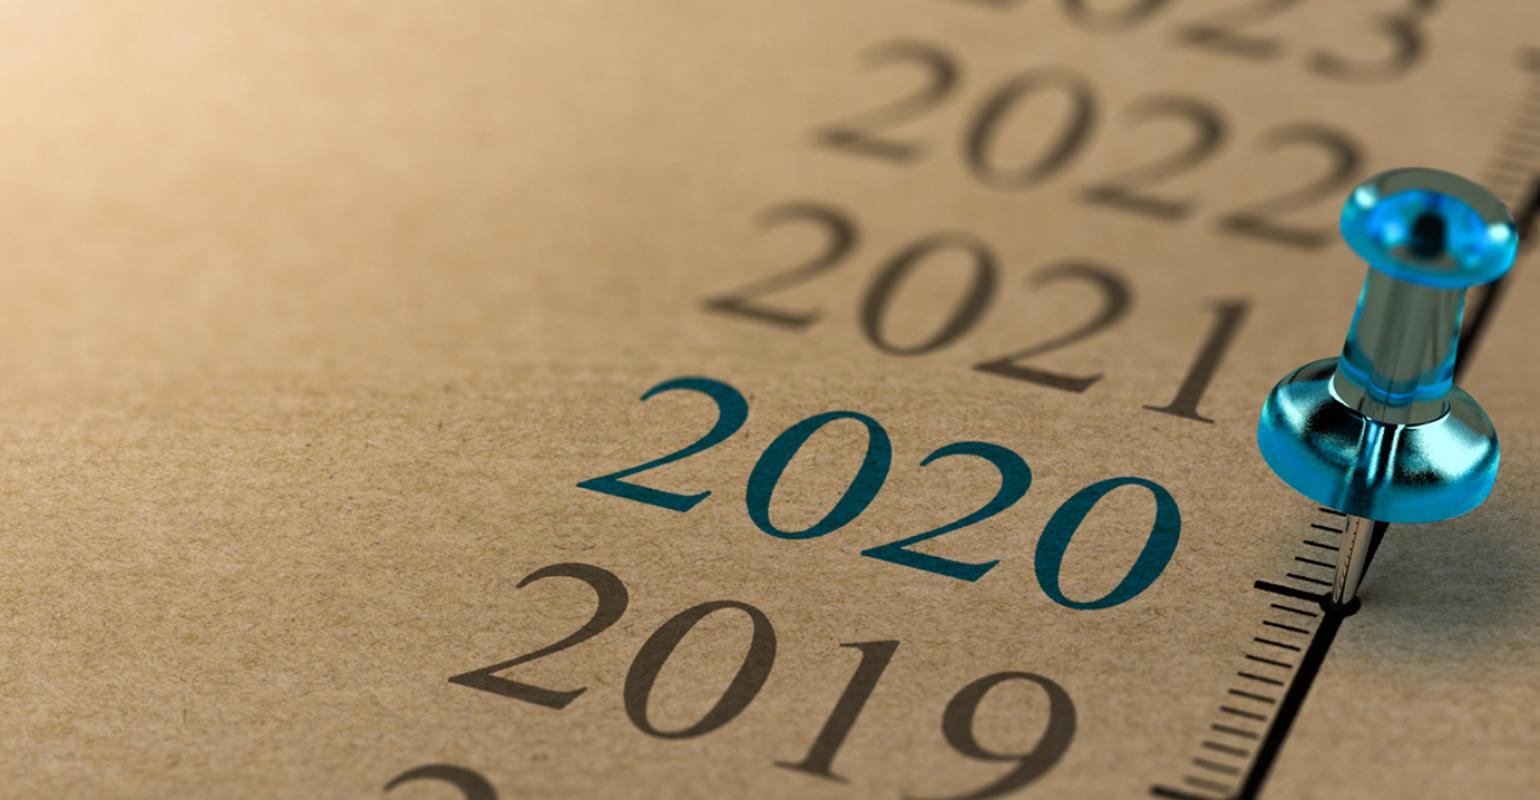 A pin pointing out the year 2020 in a list of years.